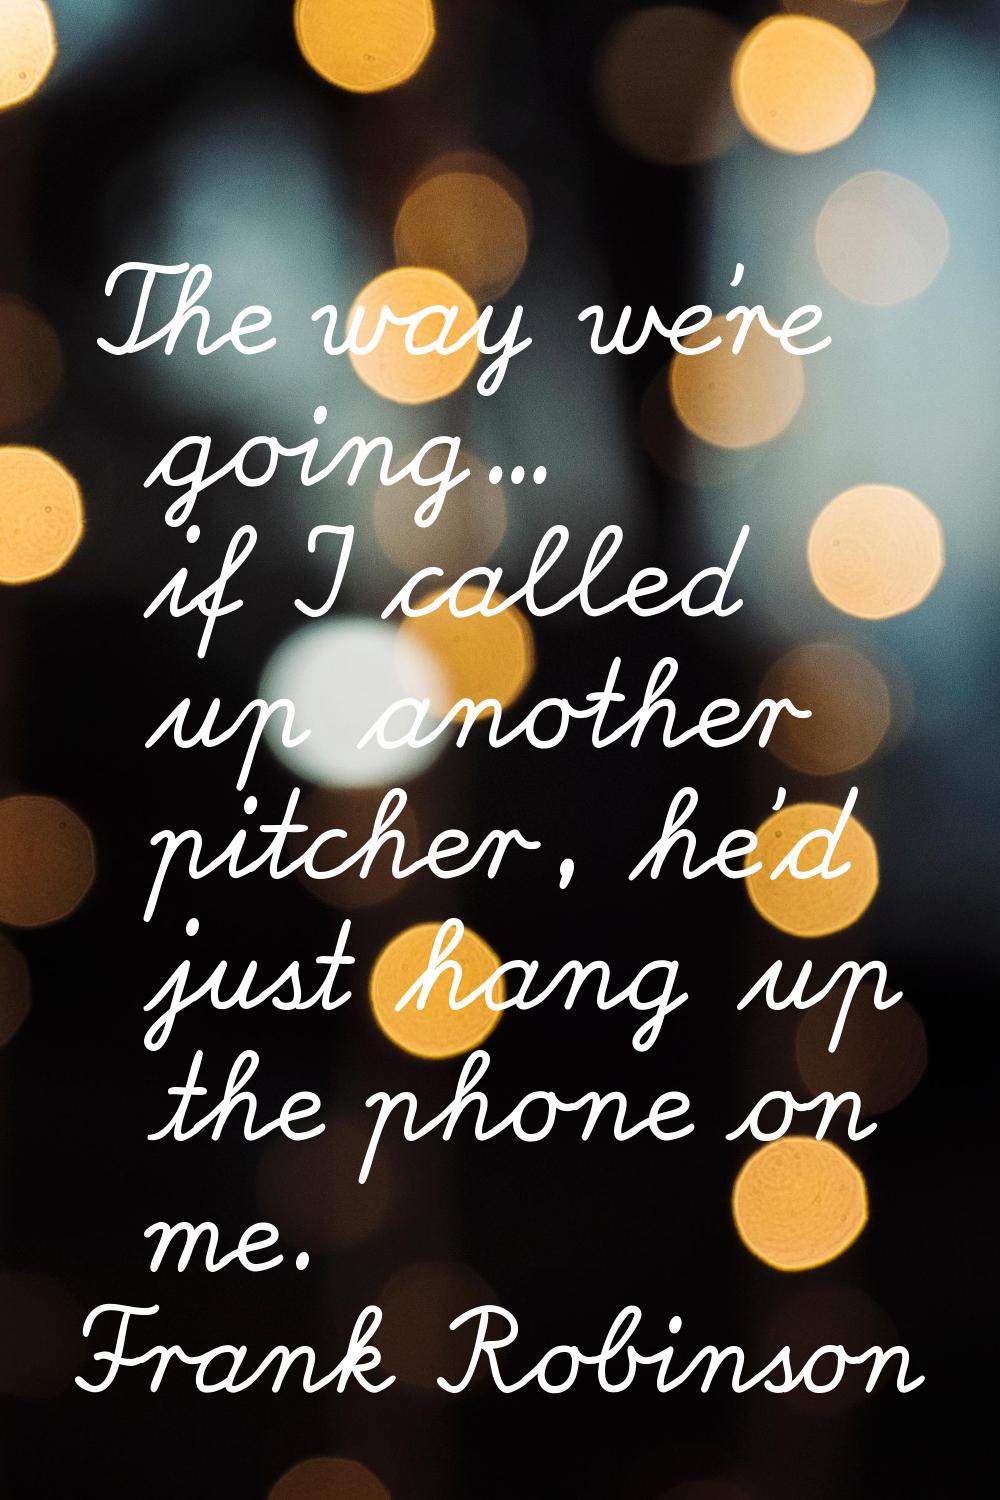 The way we're going... if I called up another pitcher, he'd just hang up the phone on me.